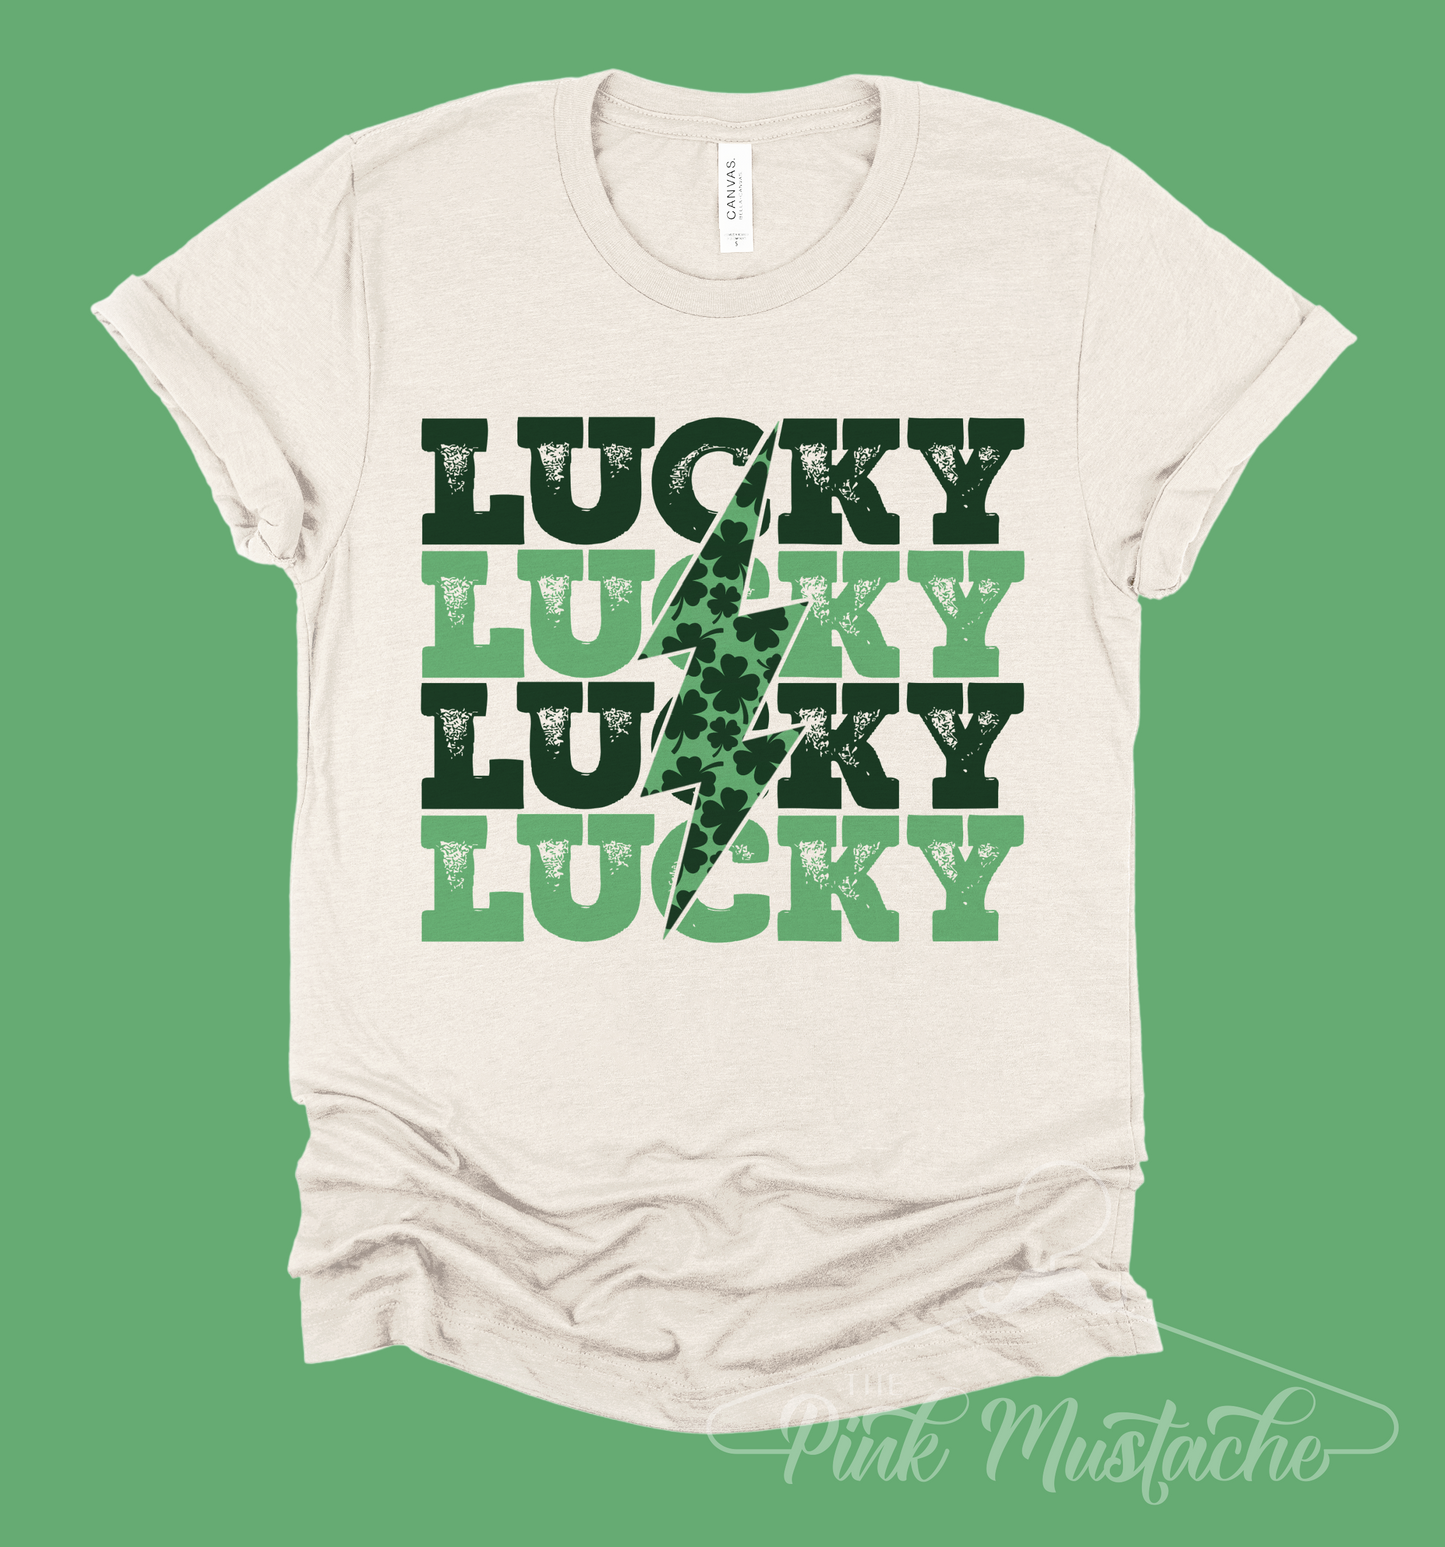 Lightning Lucky Stacked Tee / St. Patrick's Day Shirt / Toddler, Youth, and Adult Sizes Available